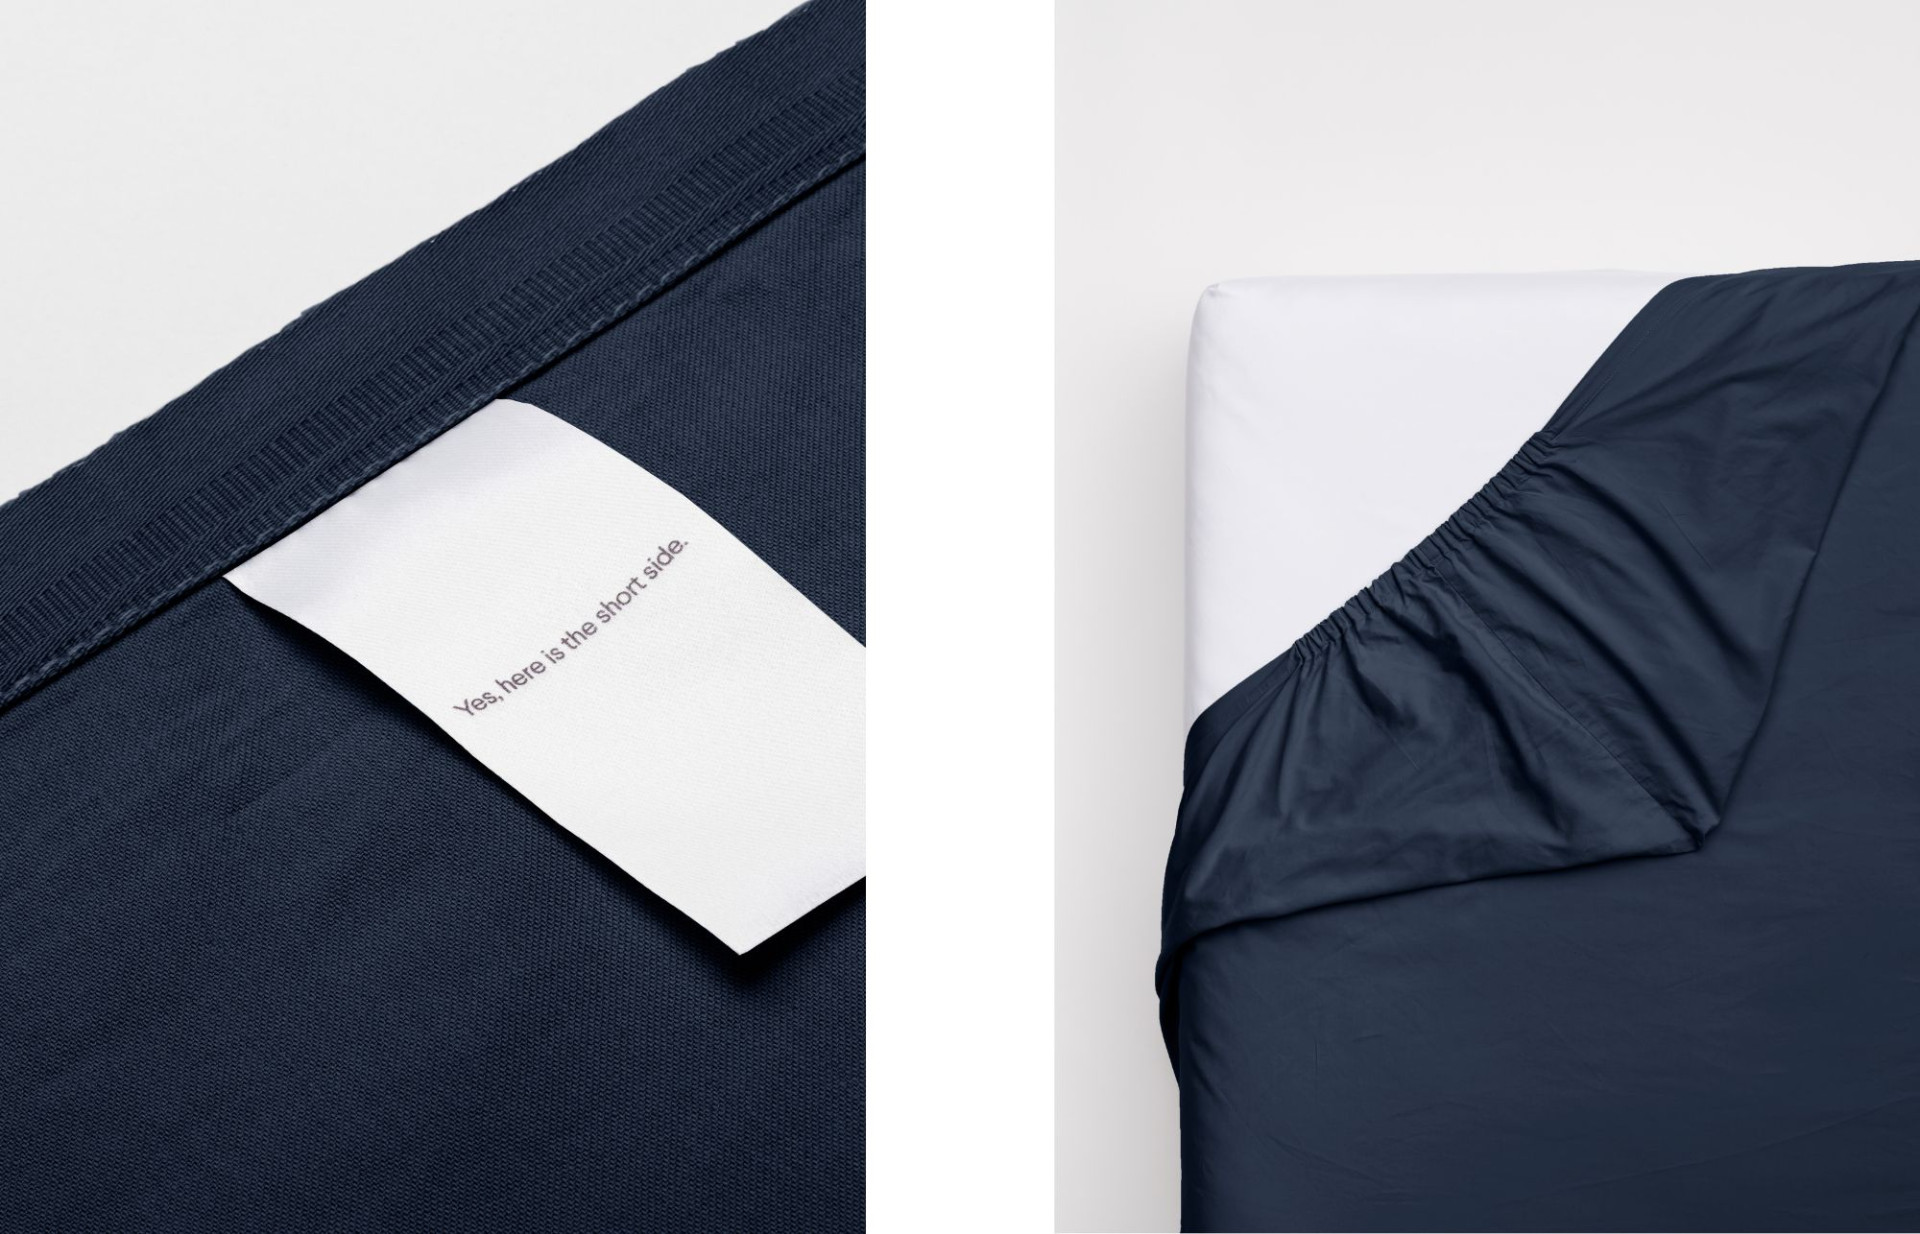 A monocolour set of bedsheet and Midnight Diving bed linen.